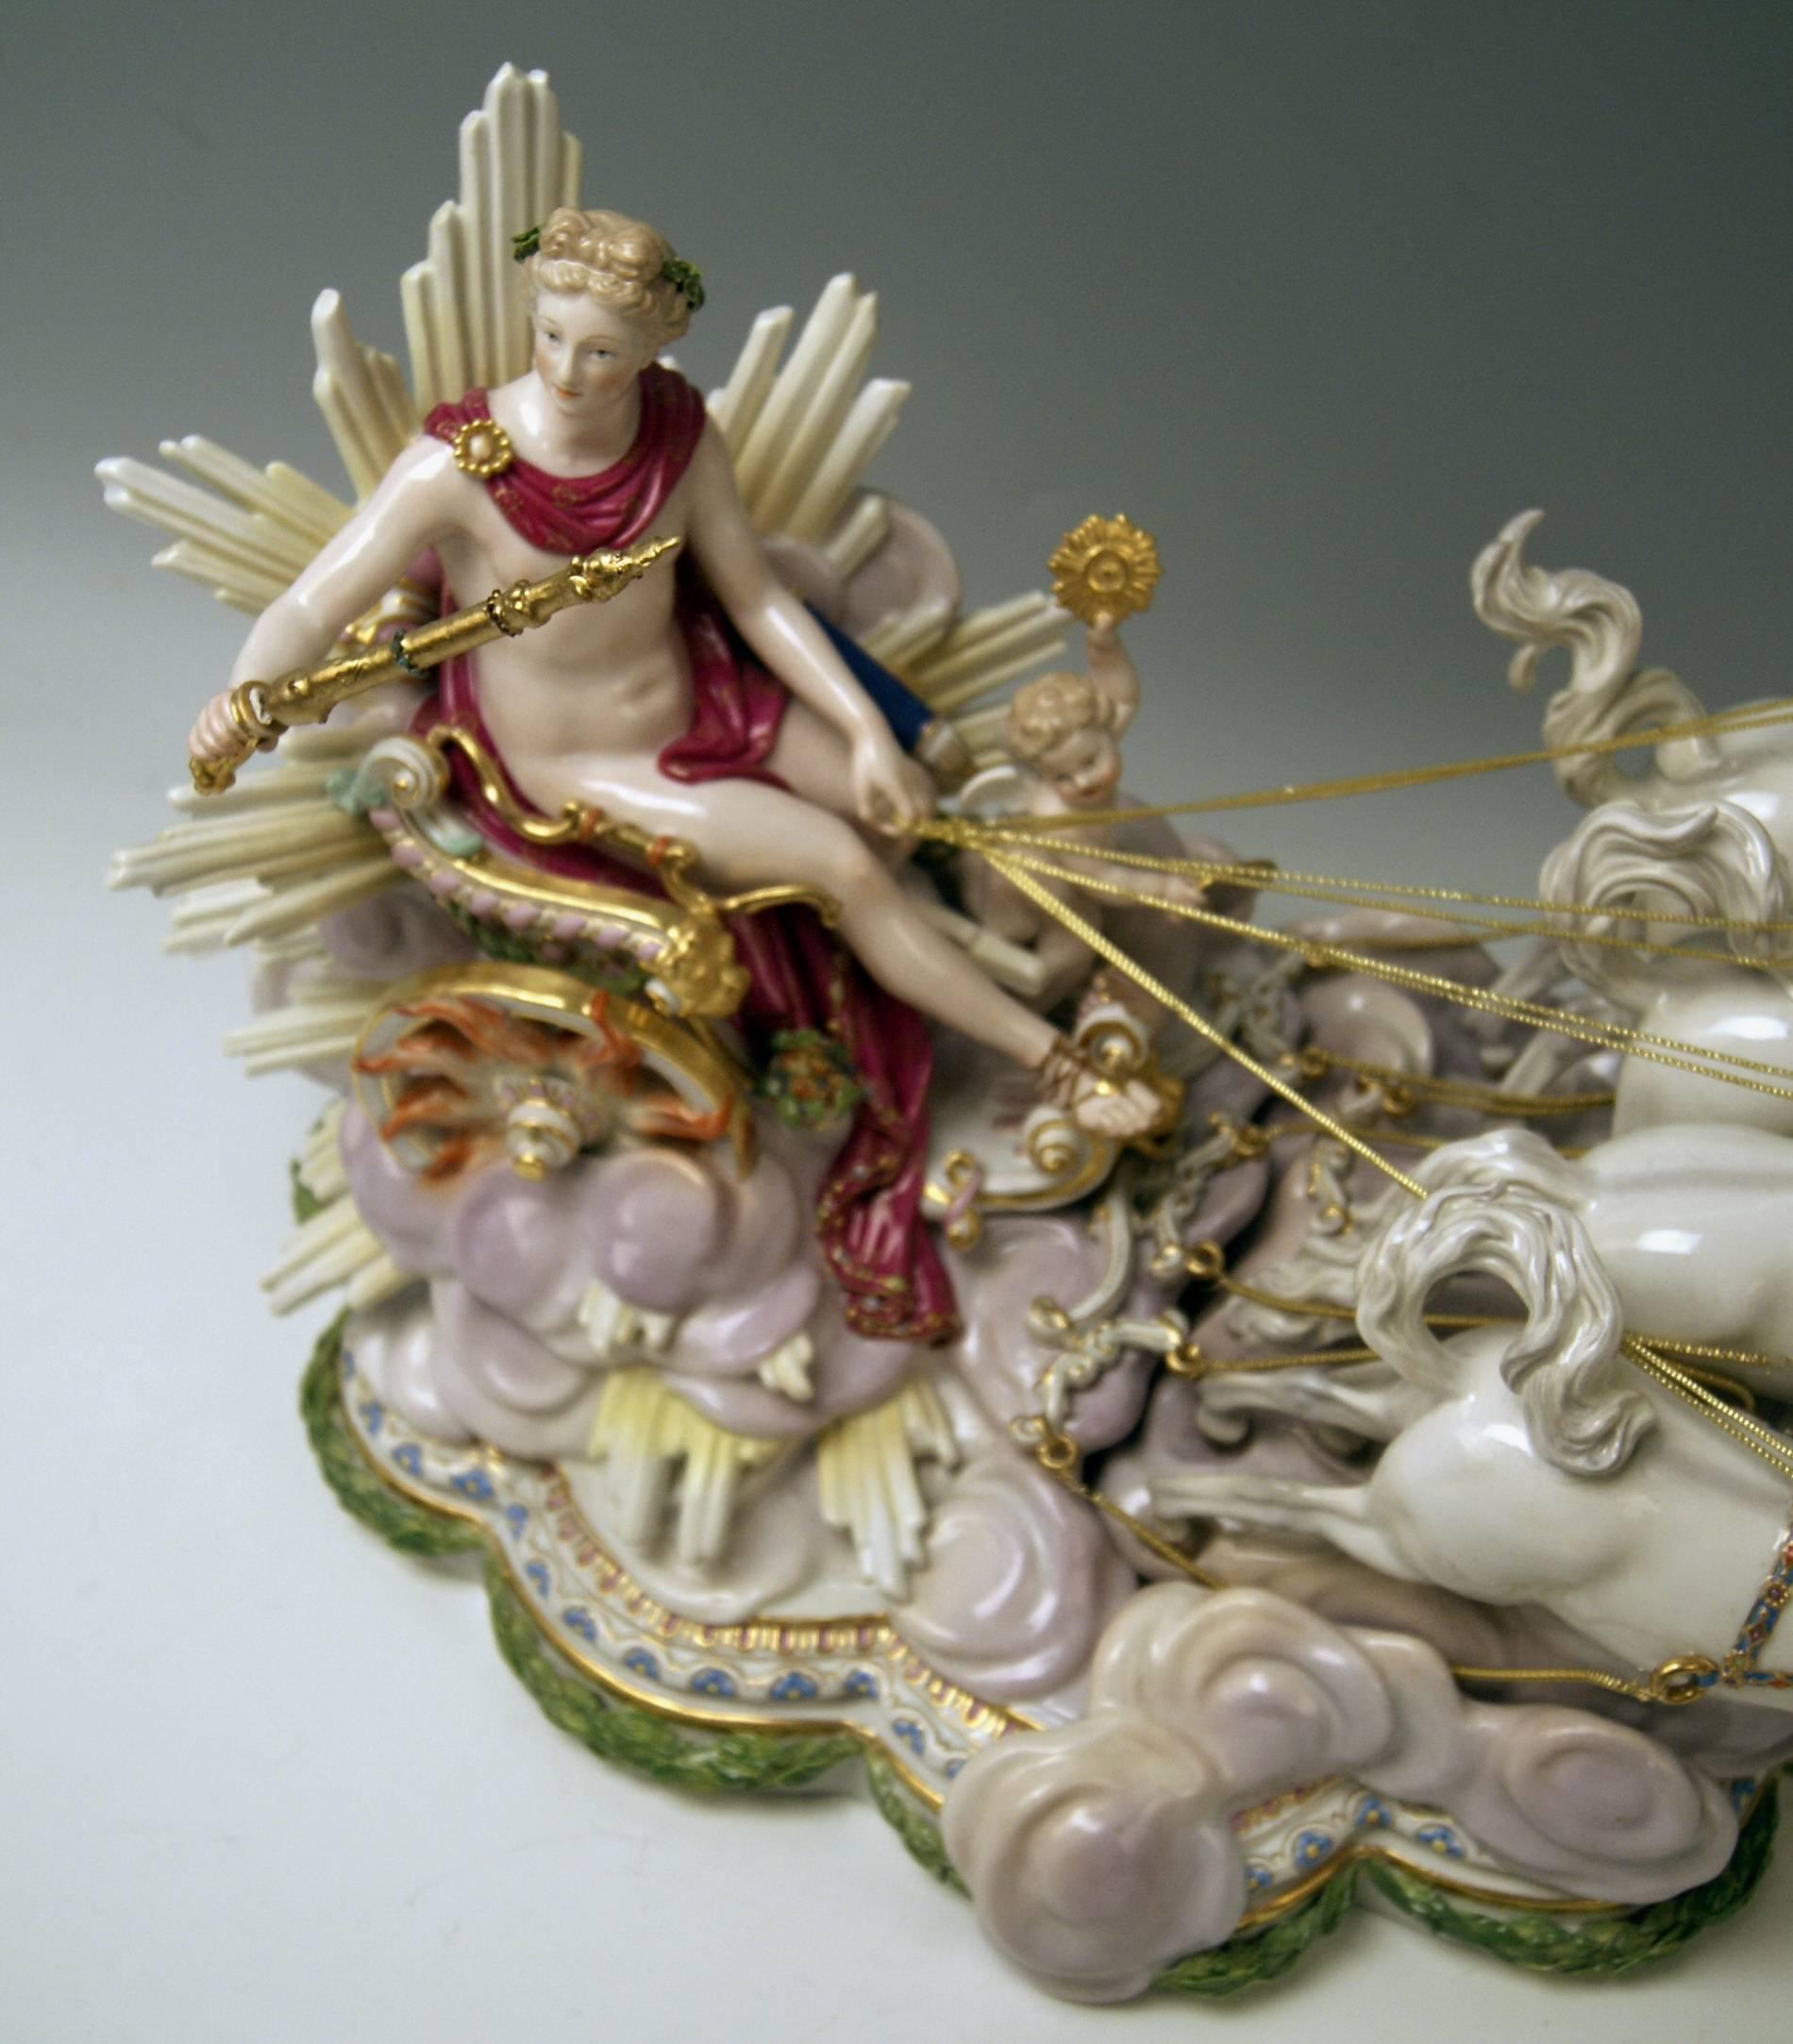 Meissen gorgeous as well as rarest huge figurine group, once made first by order of Russian Czarina Katharina the Second (= Catherine the Great) during years 1772-1773 for equipment / facility of Lomonossow Castle (= the so-said 'Pavillon an den